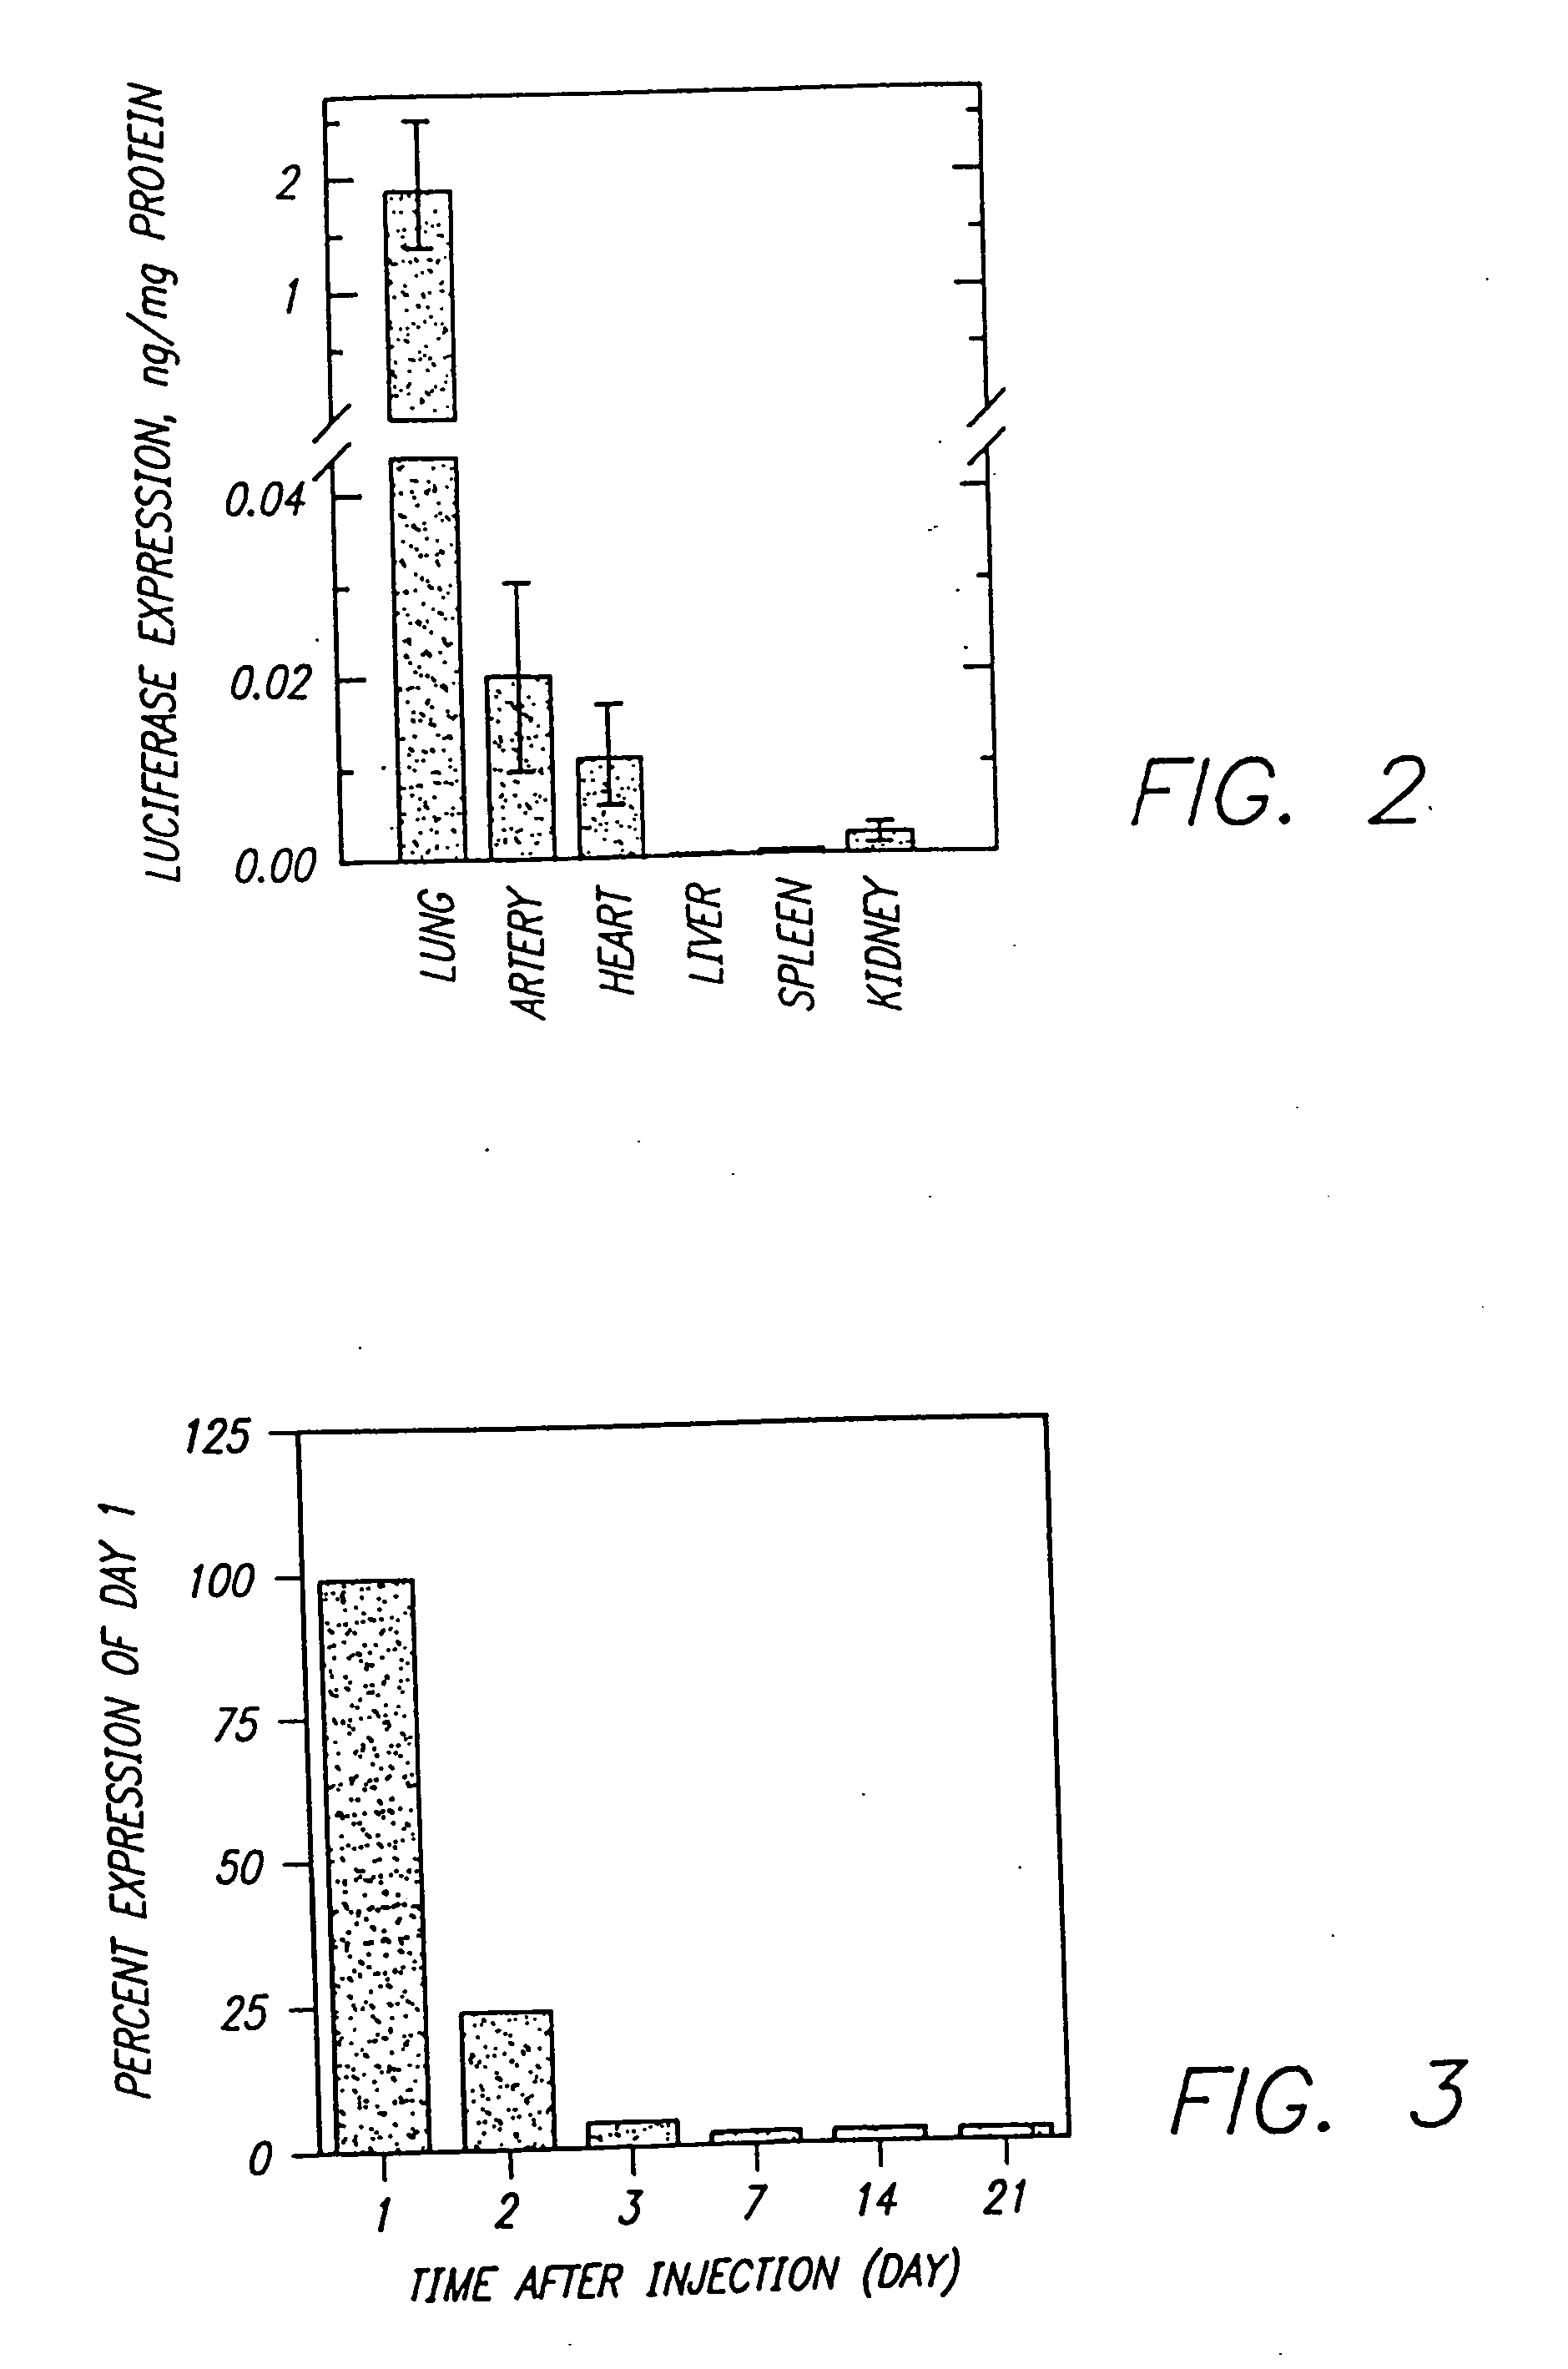 Methods of forming targeted liposomes loaded with a therapeutic agent